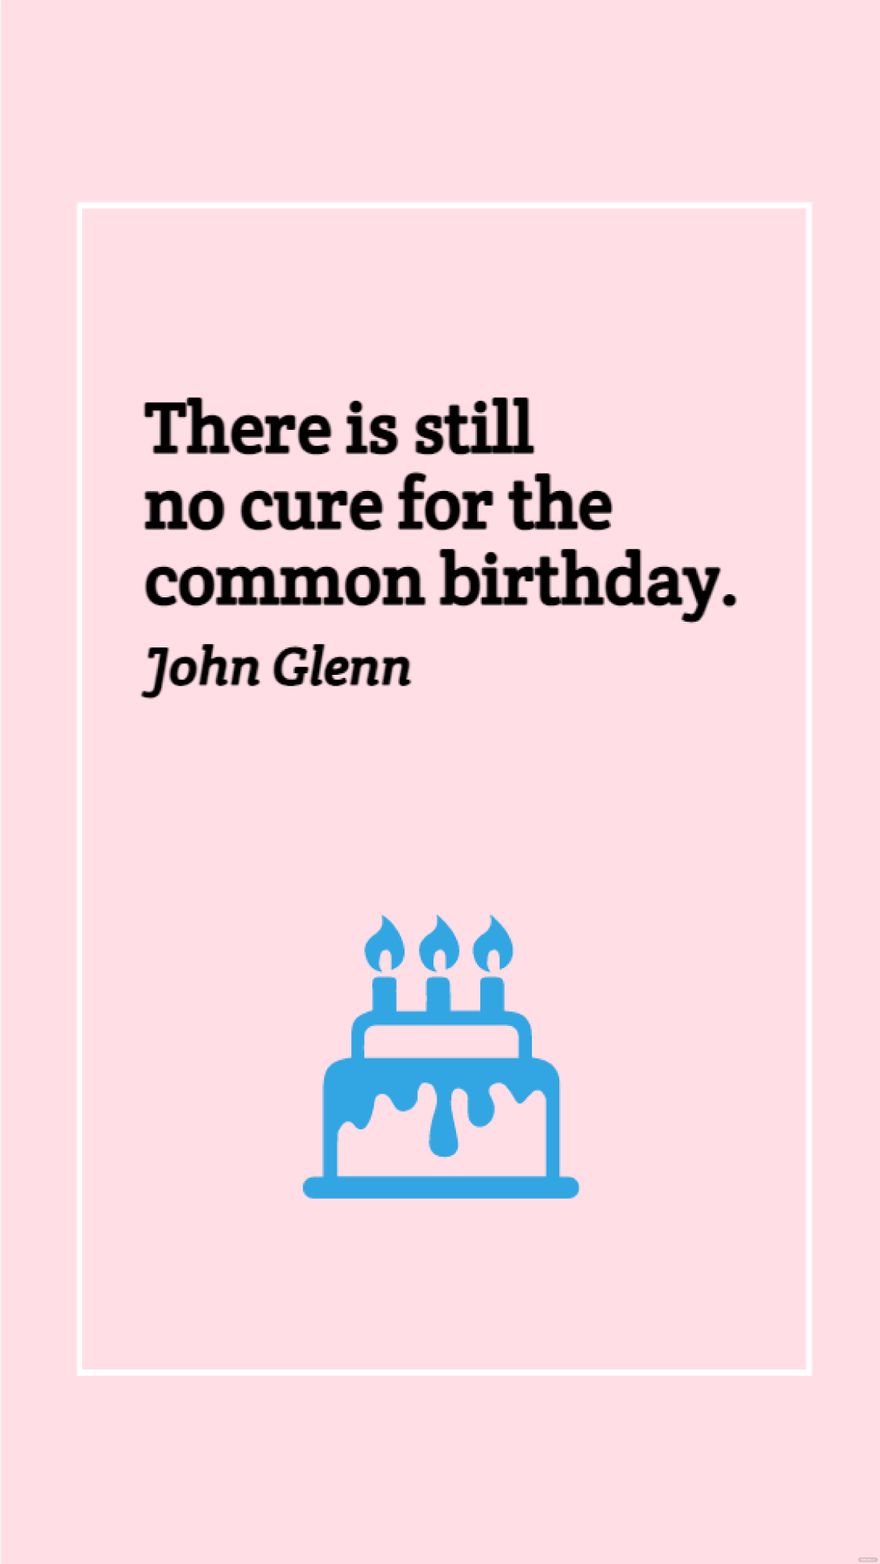 John Glenn - There is still no cure for the common birthday. in JPG